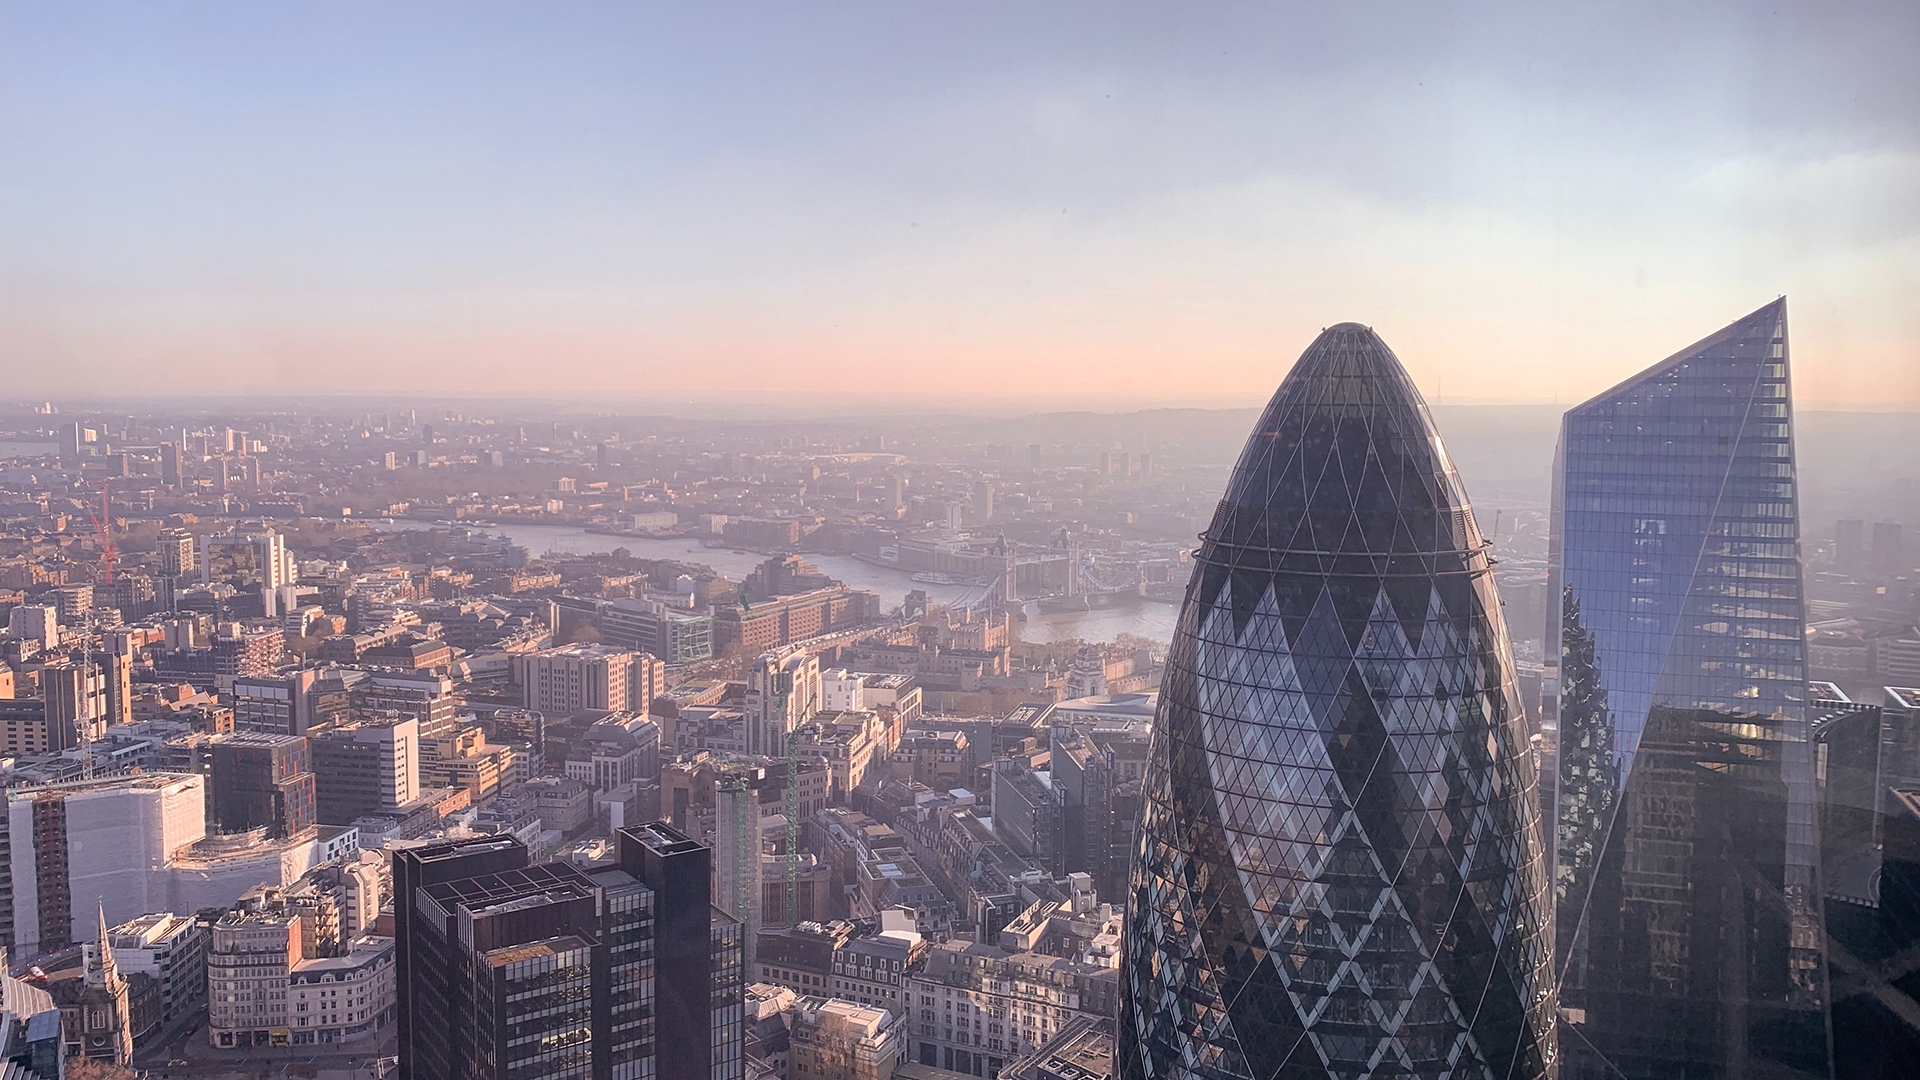 View over London St Mary Axe